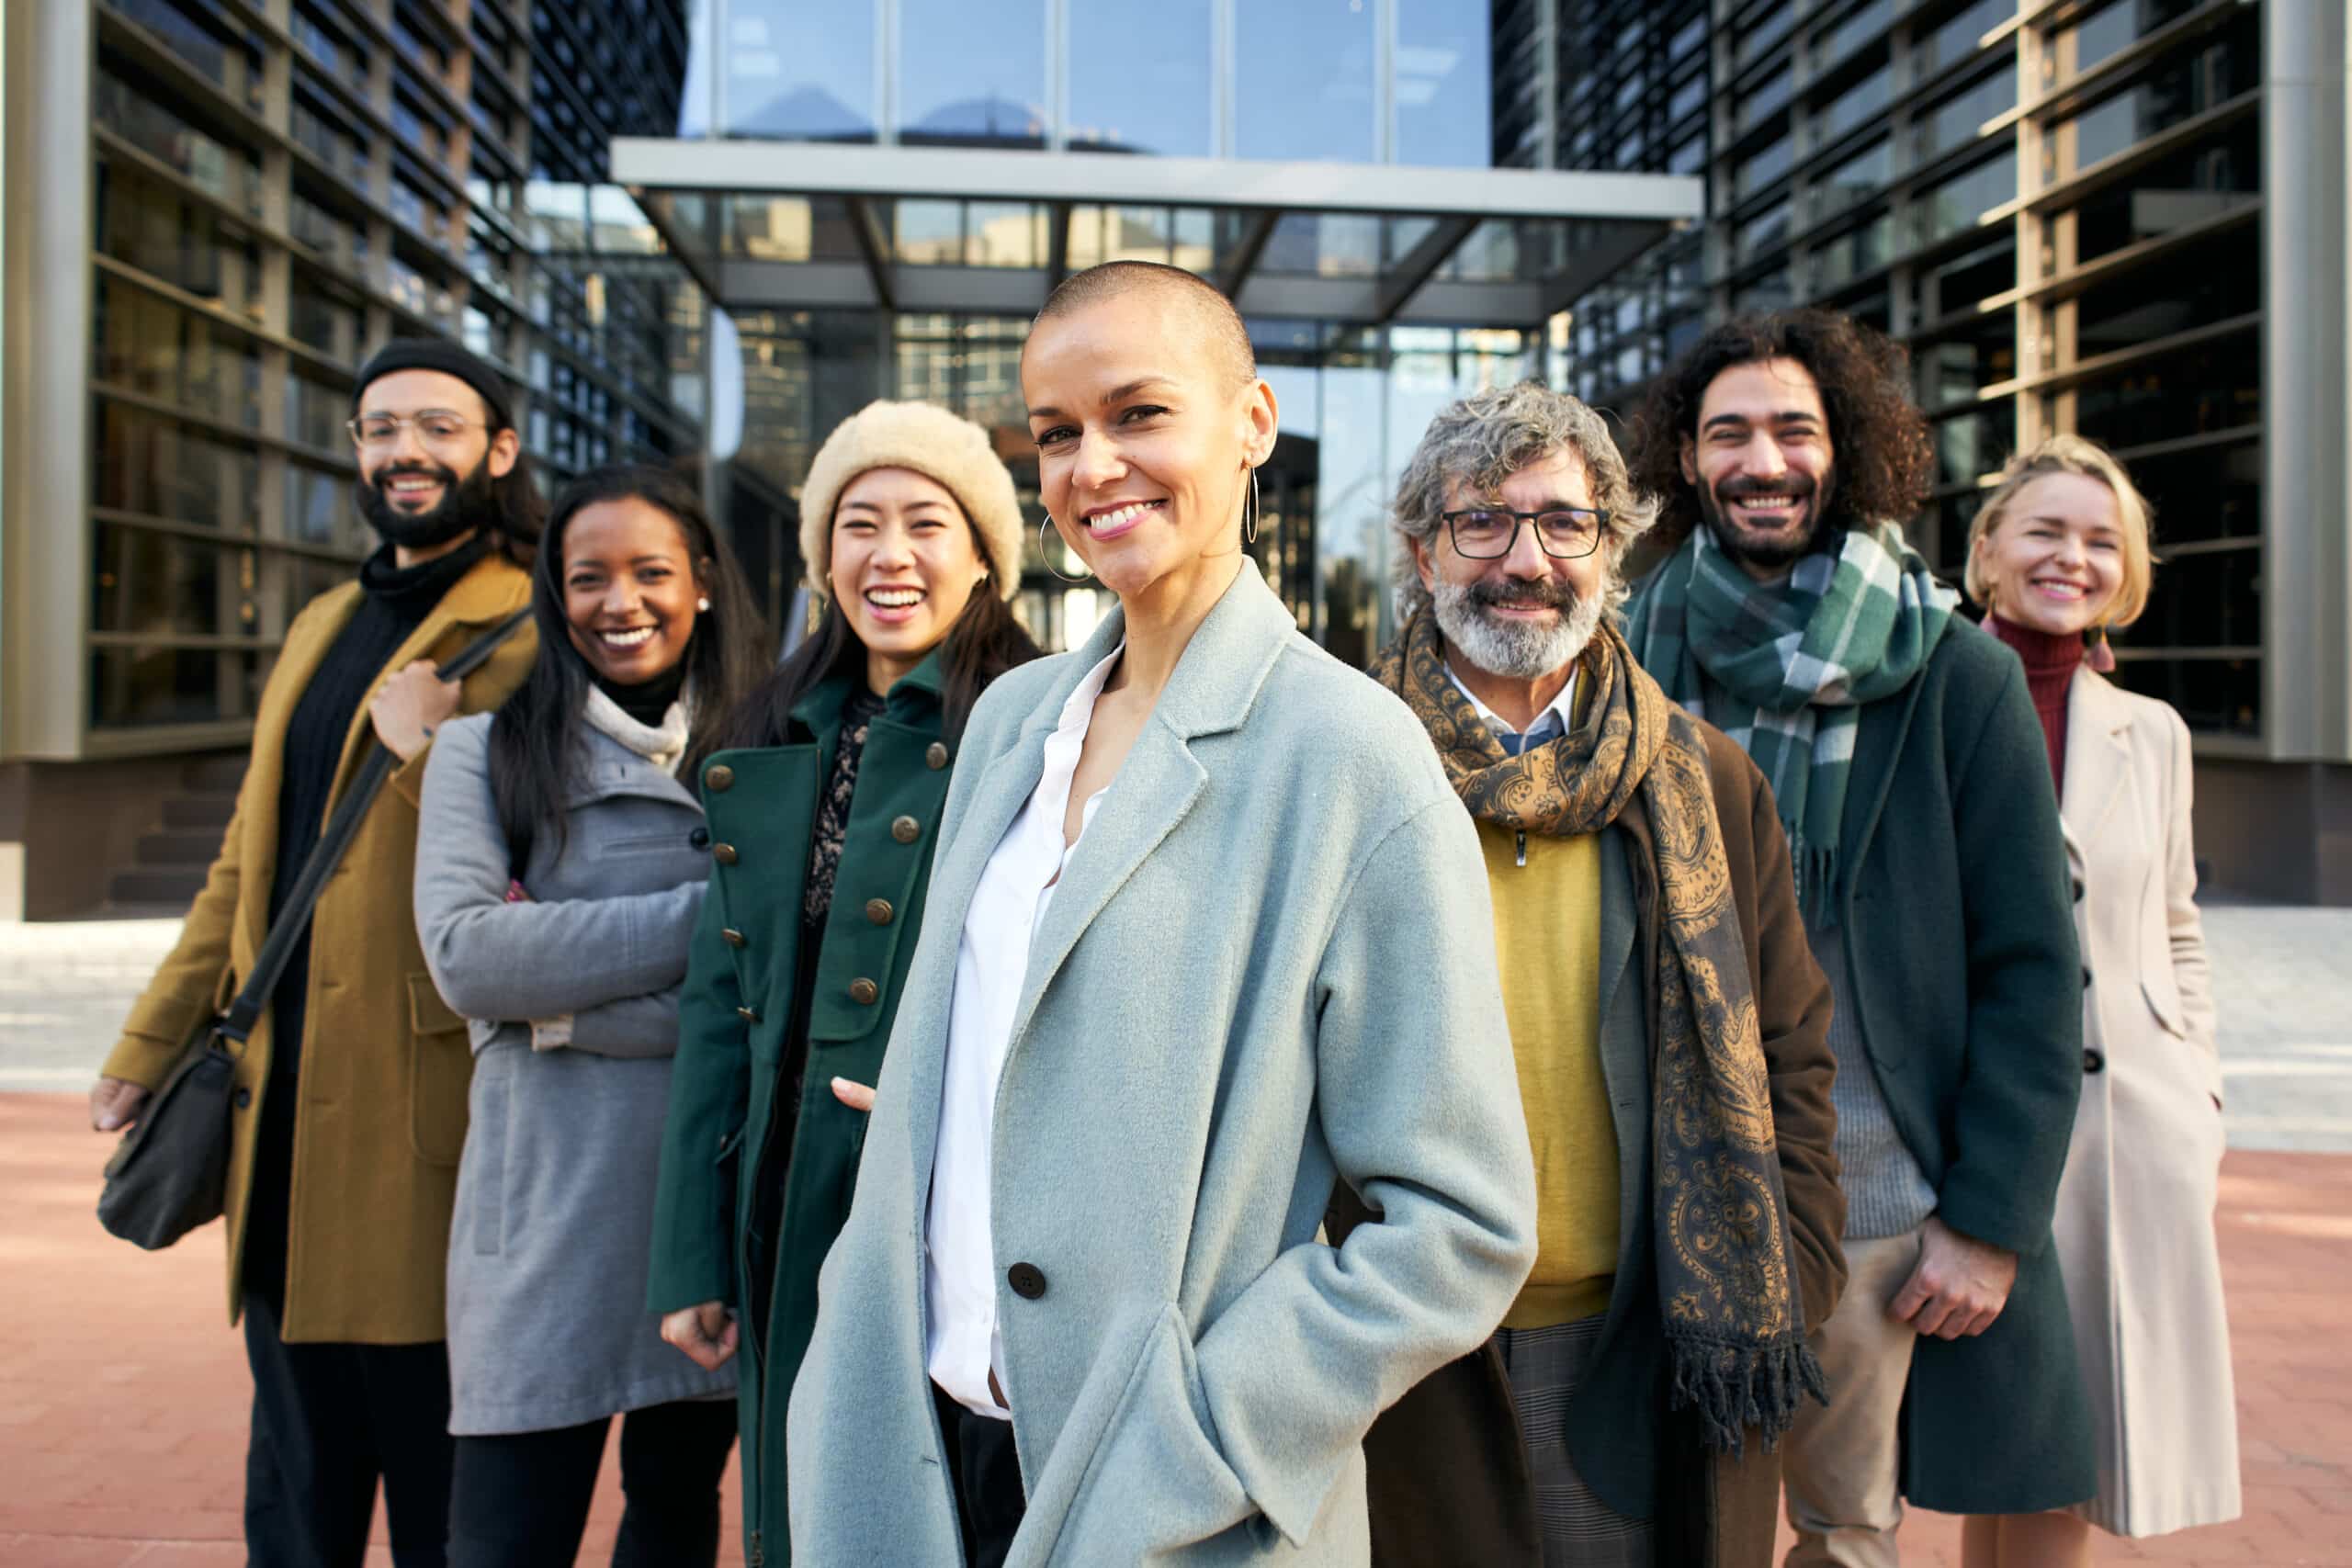 A group of smiling business people from a company led by an empowered shaved air woman Cheerful Looking at camera portrait of a group of happy co workers of diverse races and ages